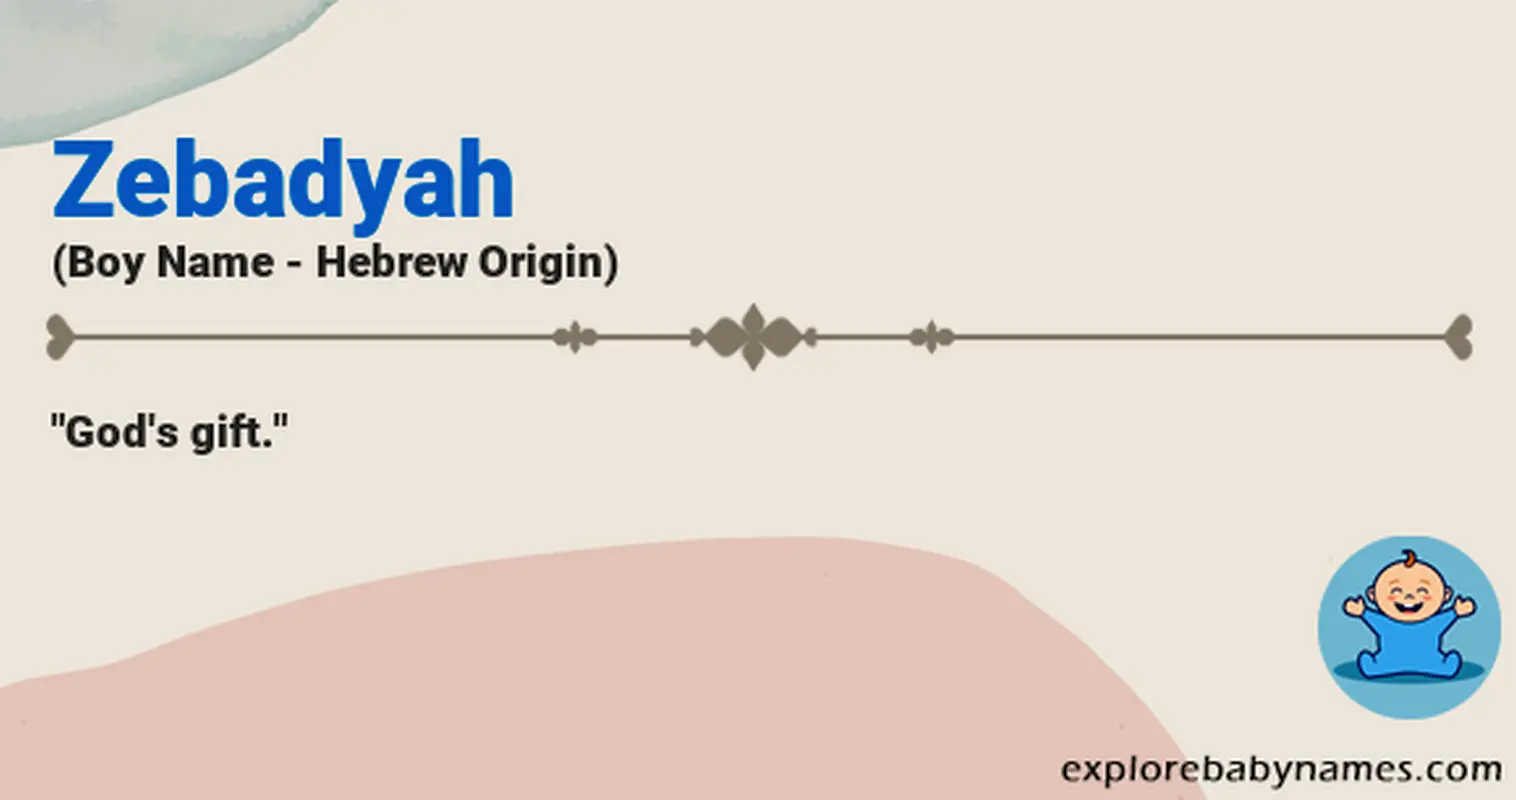 Meaning of Zebadyah